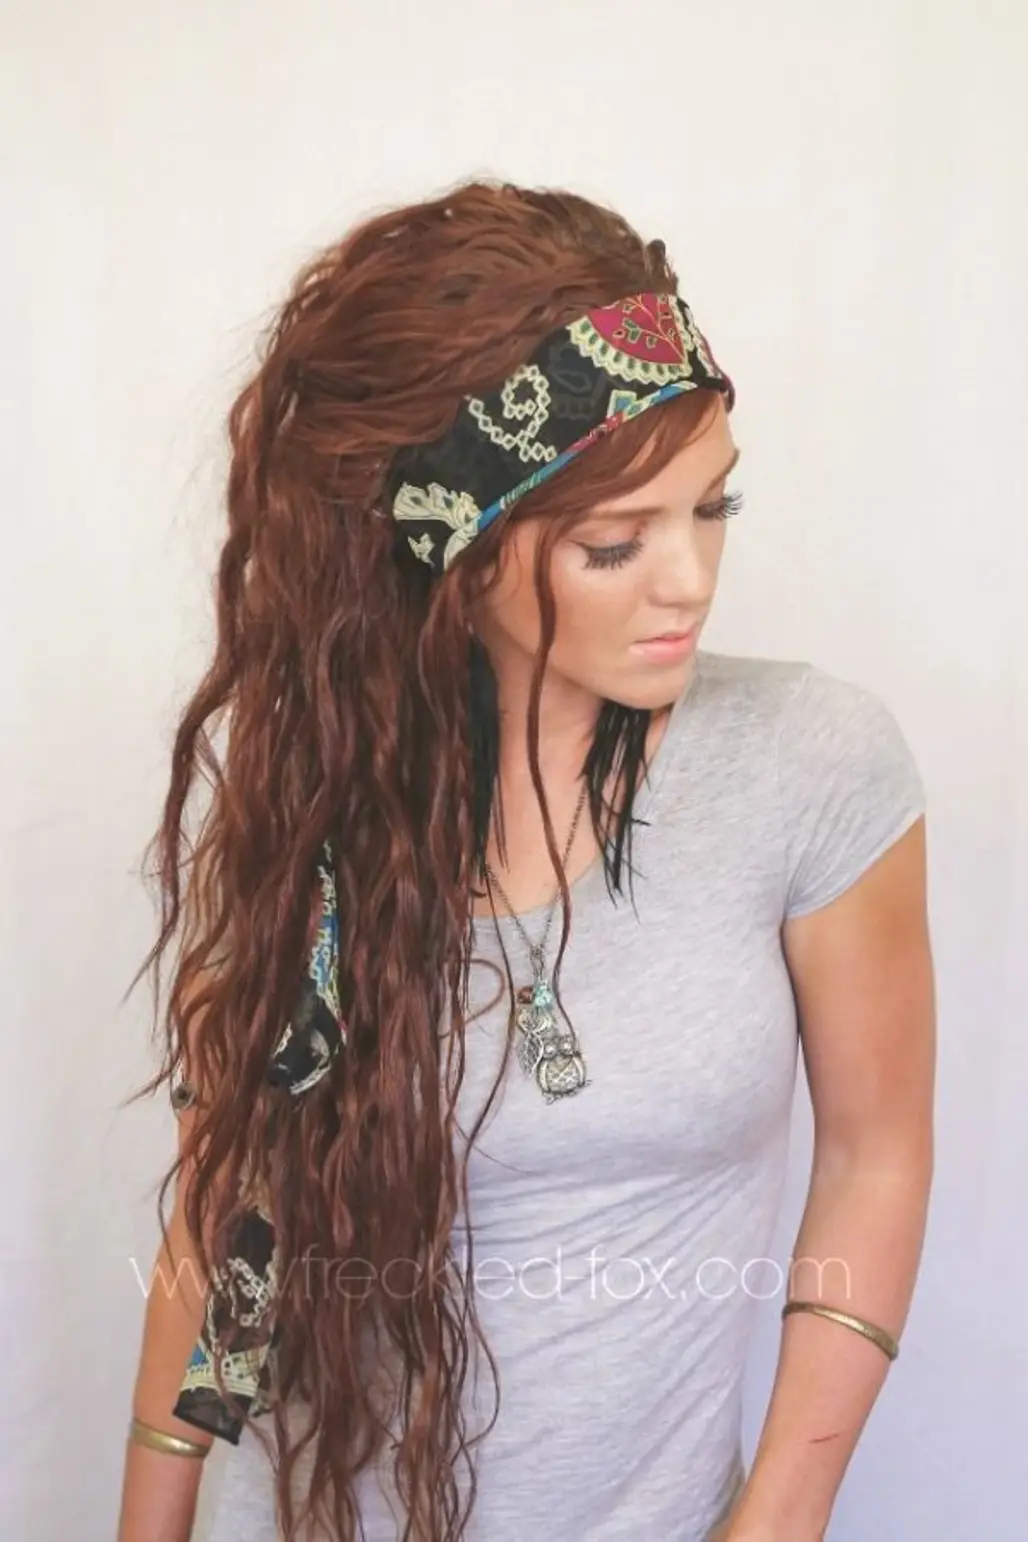 hair,clothing,fashion accessory,hairstyle,cap,